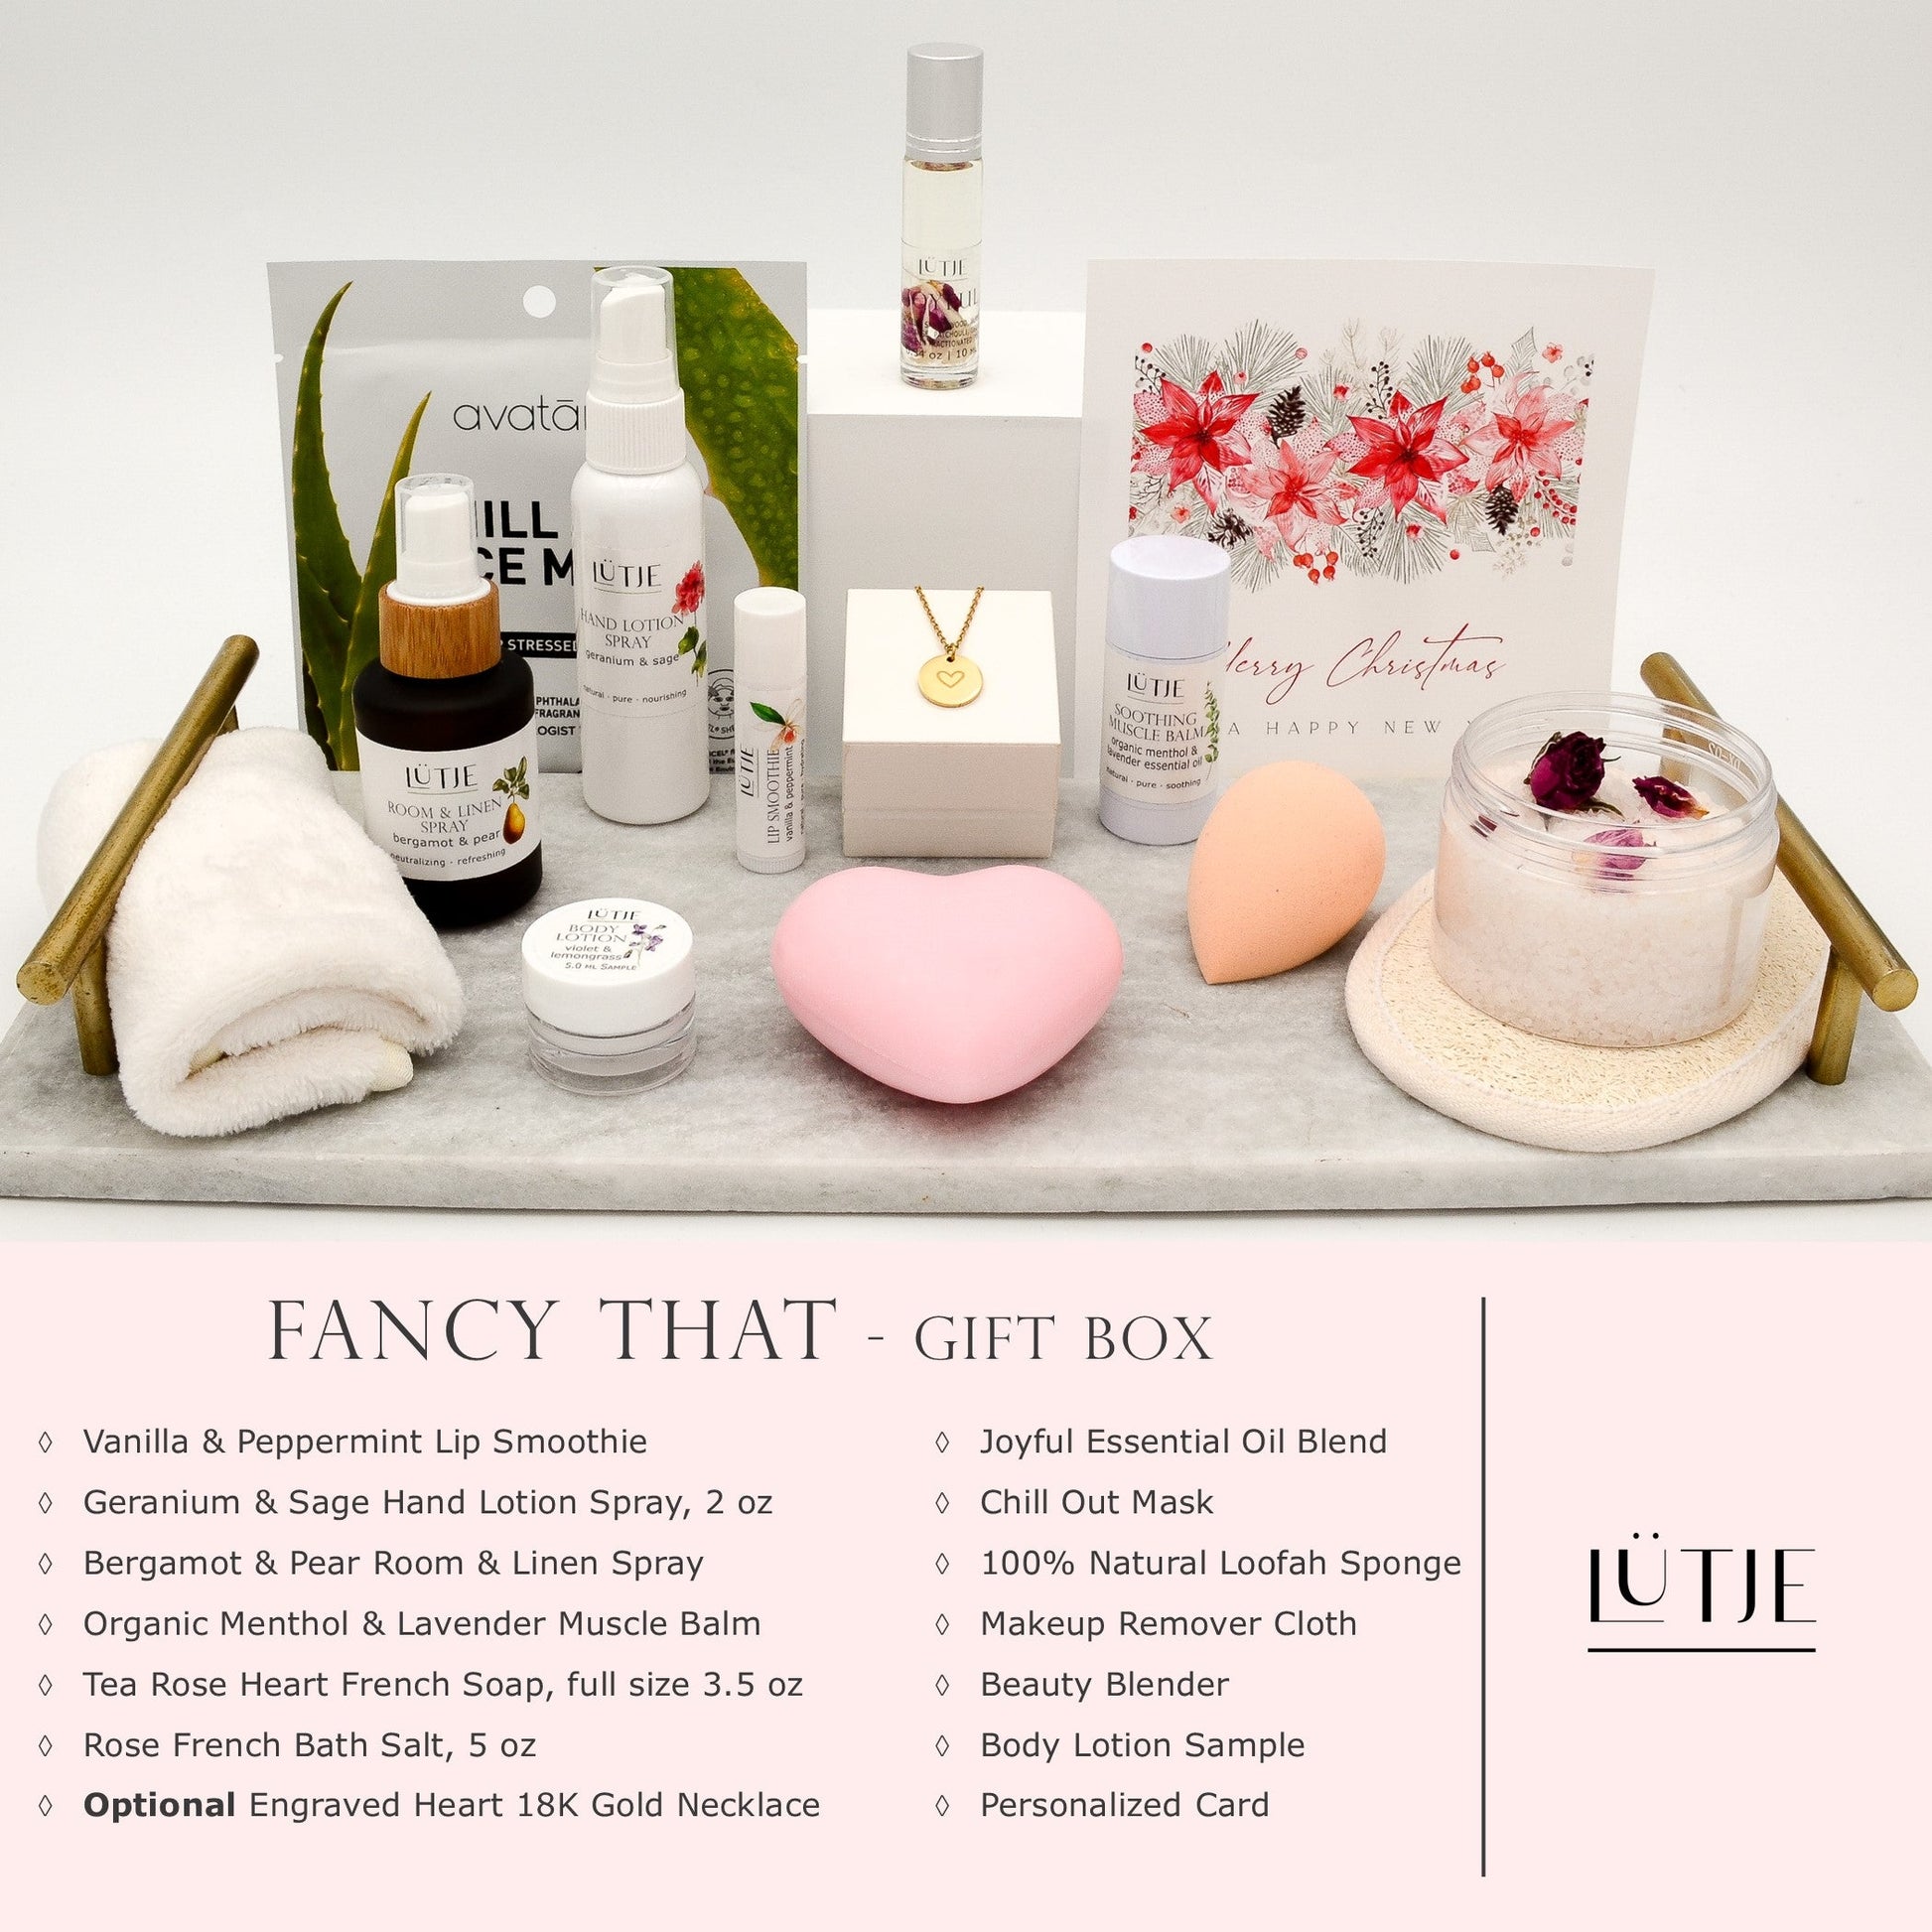 Fancy That Gift Box for women, BFF, wife, daughter, sister, mom, or grandma, includes Geranium & Sage hand lotion spray, essential oil, lip balm, soothing muscle balm, Bergamot & Pear room & linen spray, French soap, French bath salts, hydrating face mask, other bath, spa and self-care items, and 18K gold-plated necklace with engraved heart.